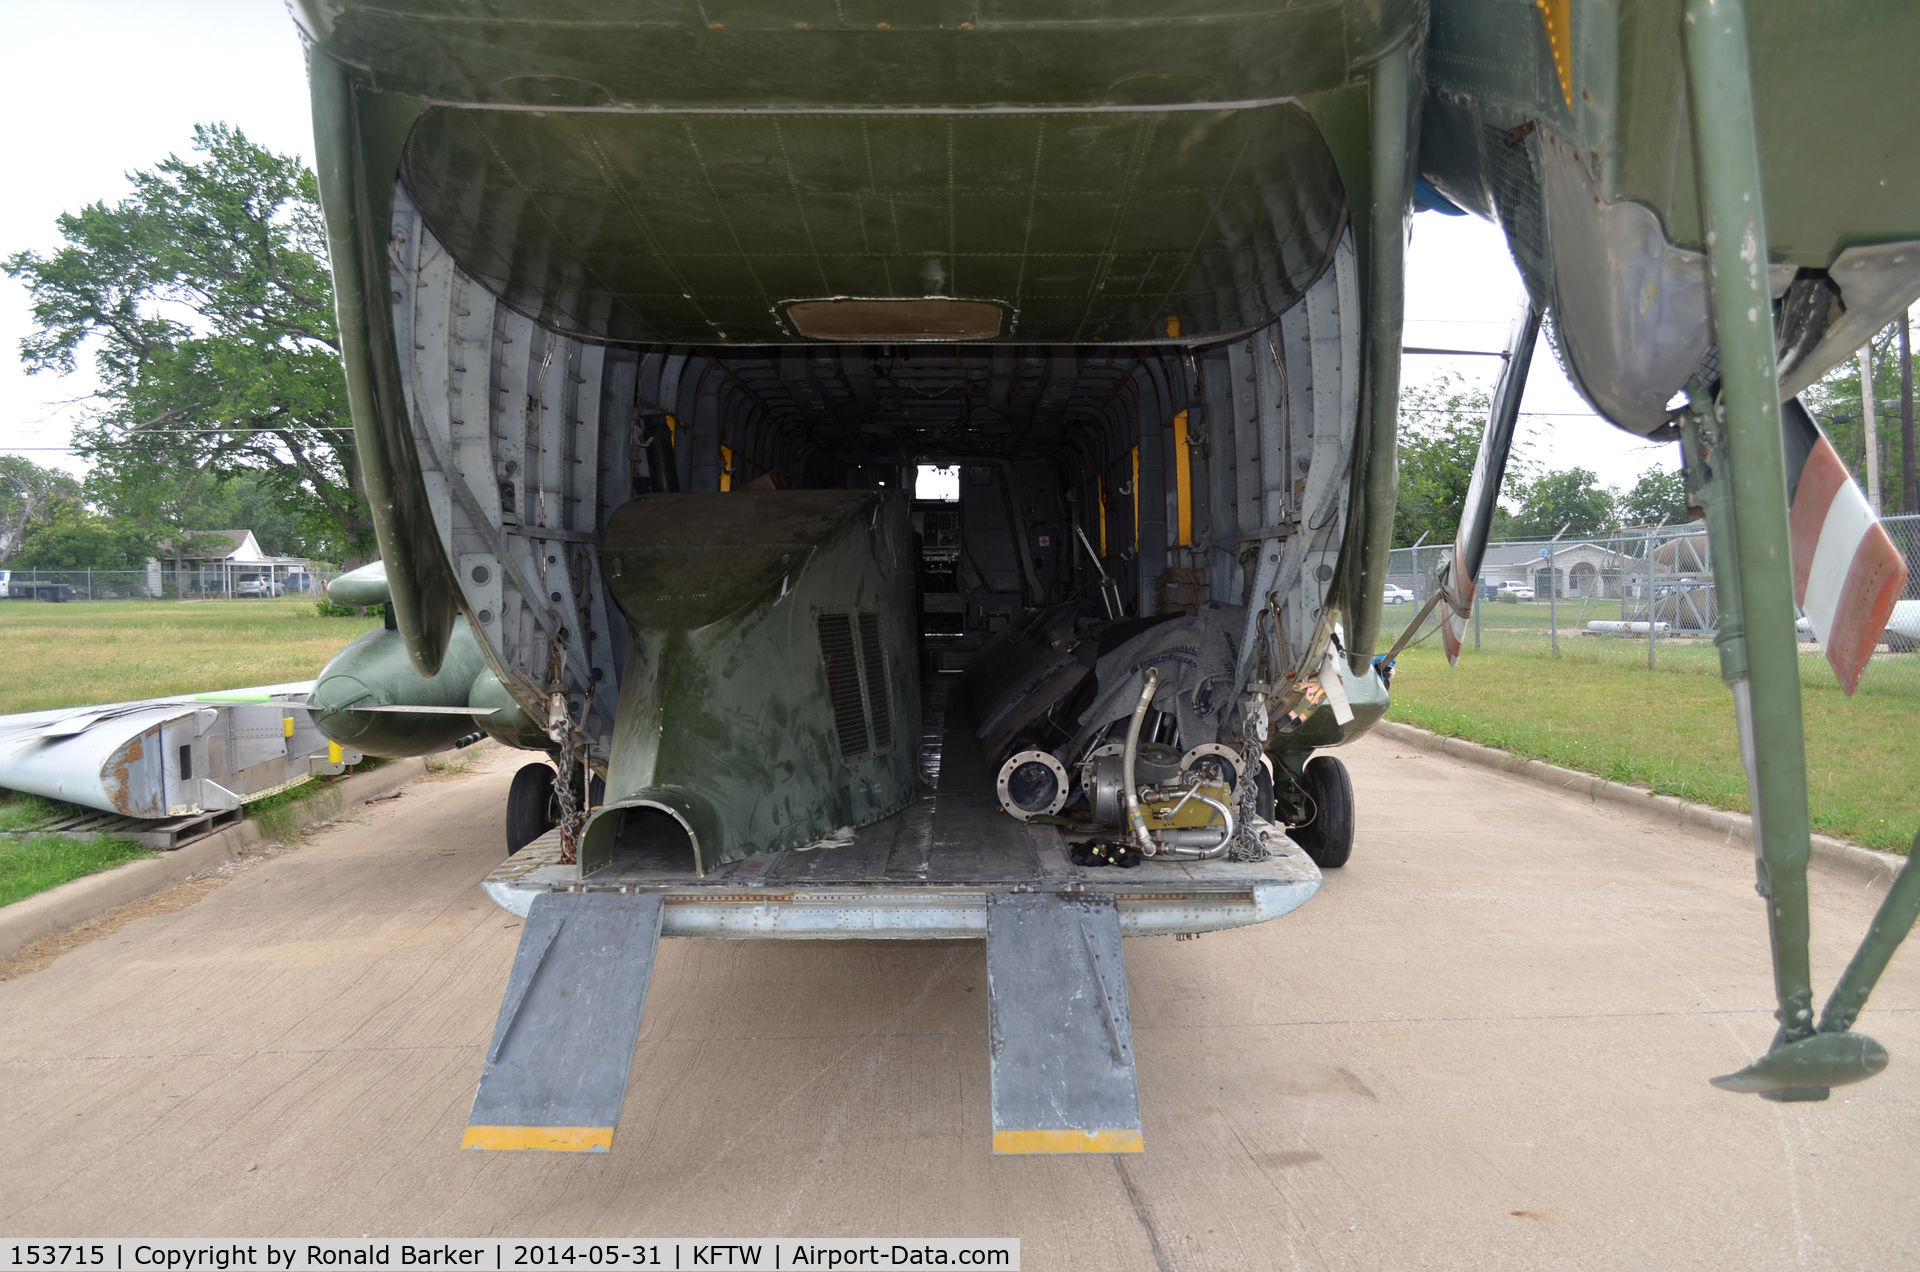 153715, Sikorsky CH-53A Sea Stallion C/N 65-105, Looking in rear hatch of 